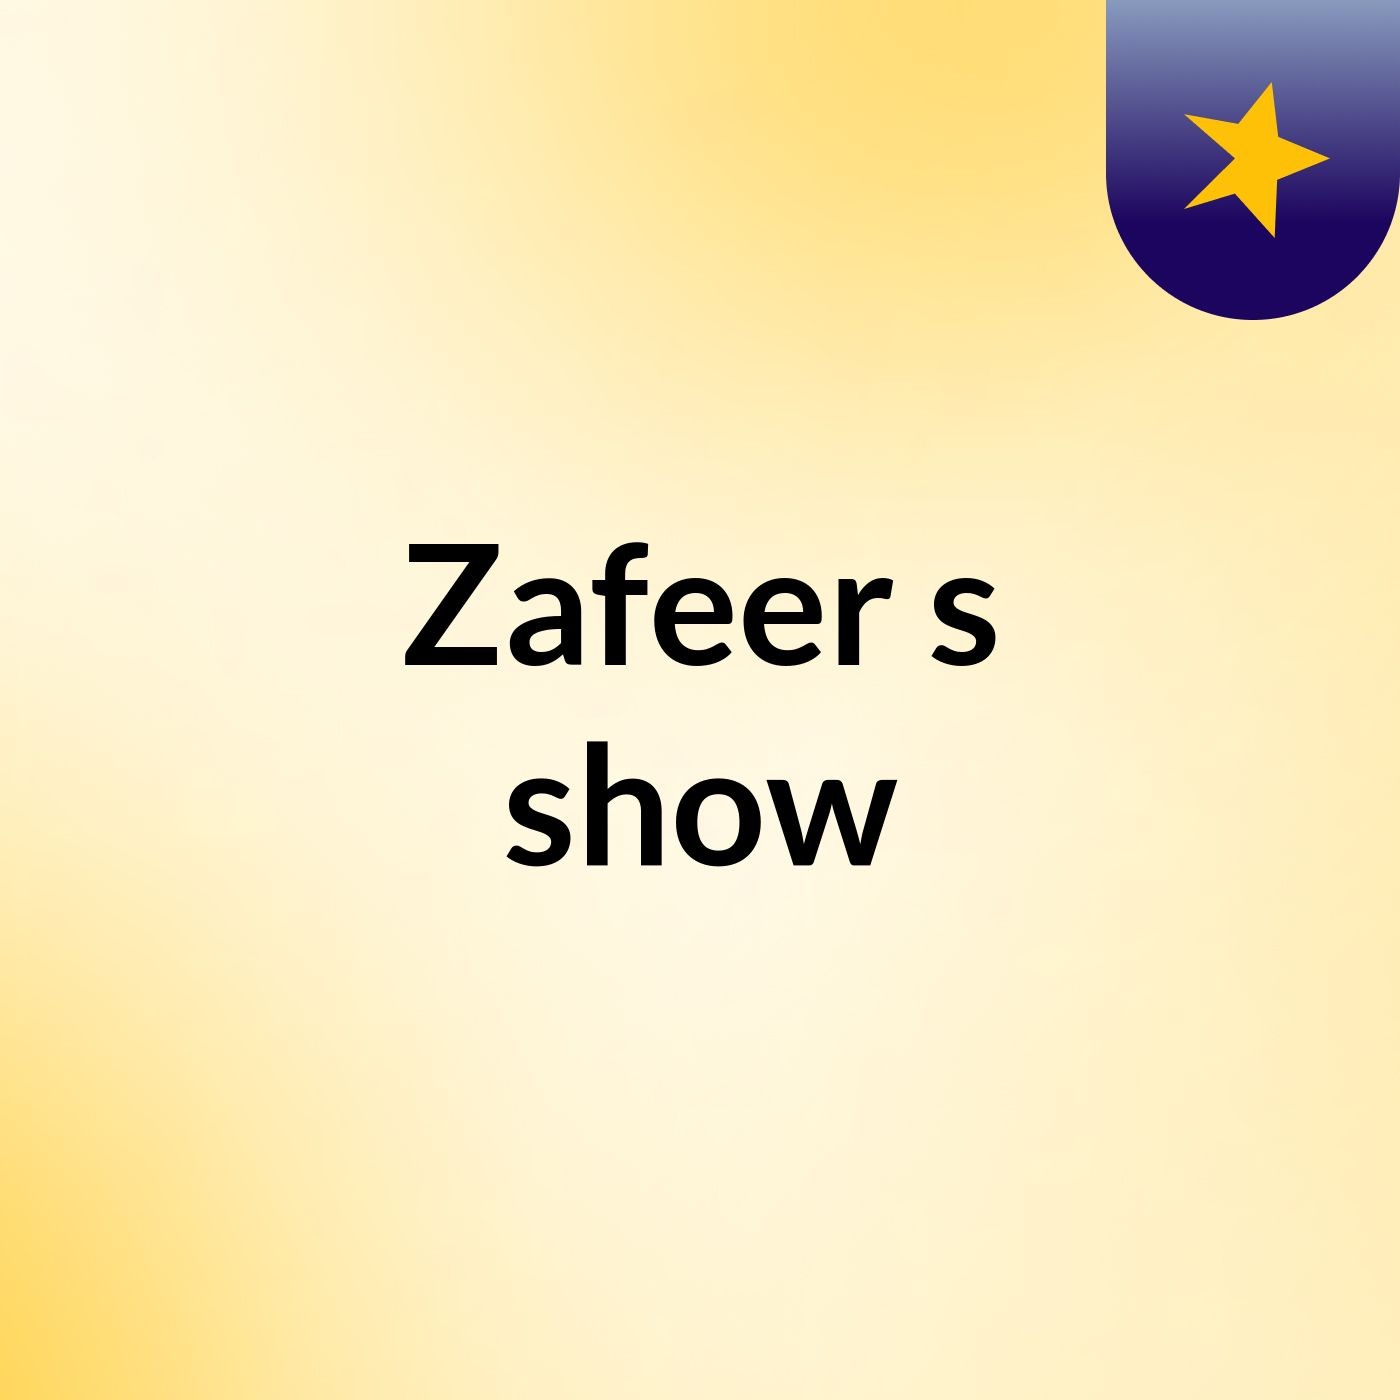 Zafeer's show